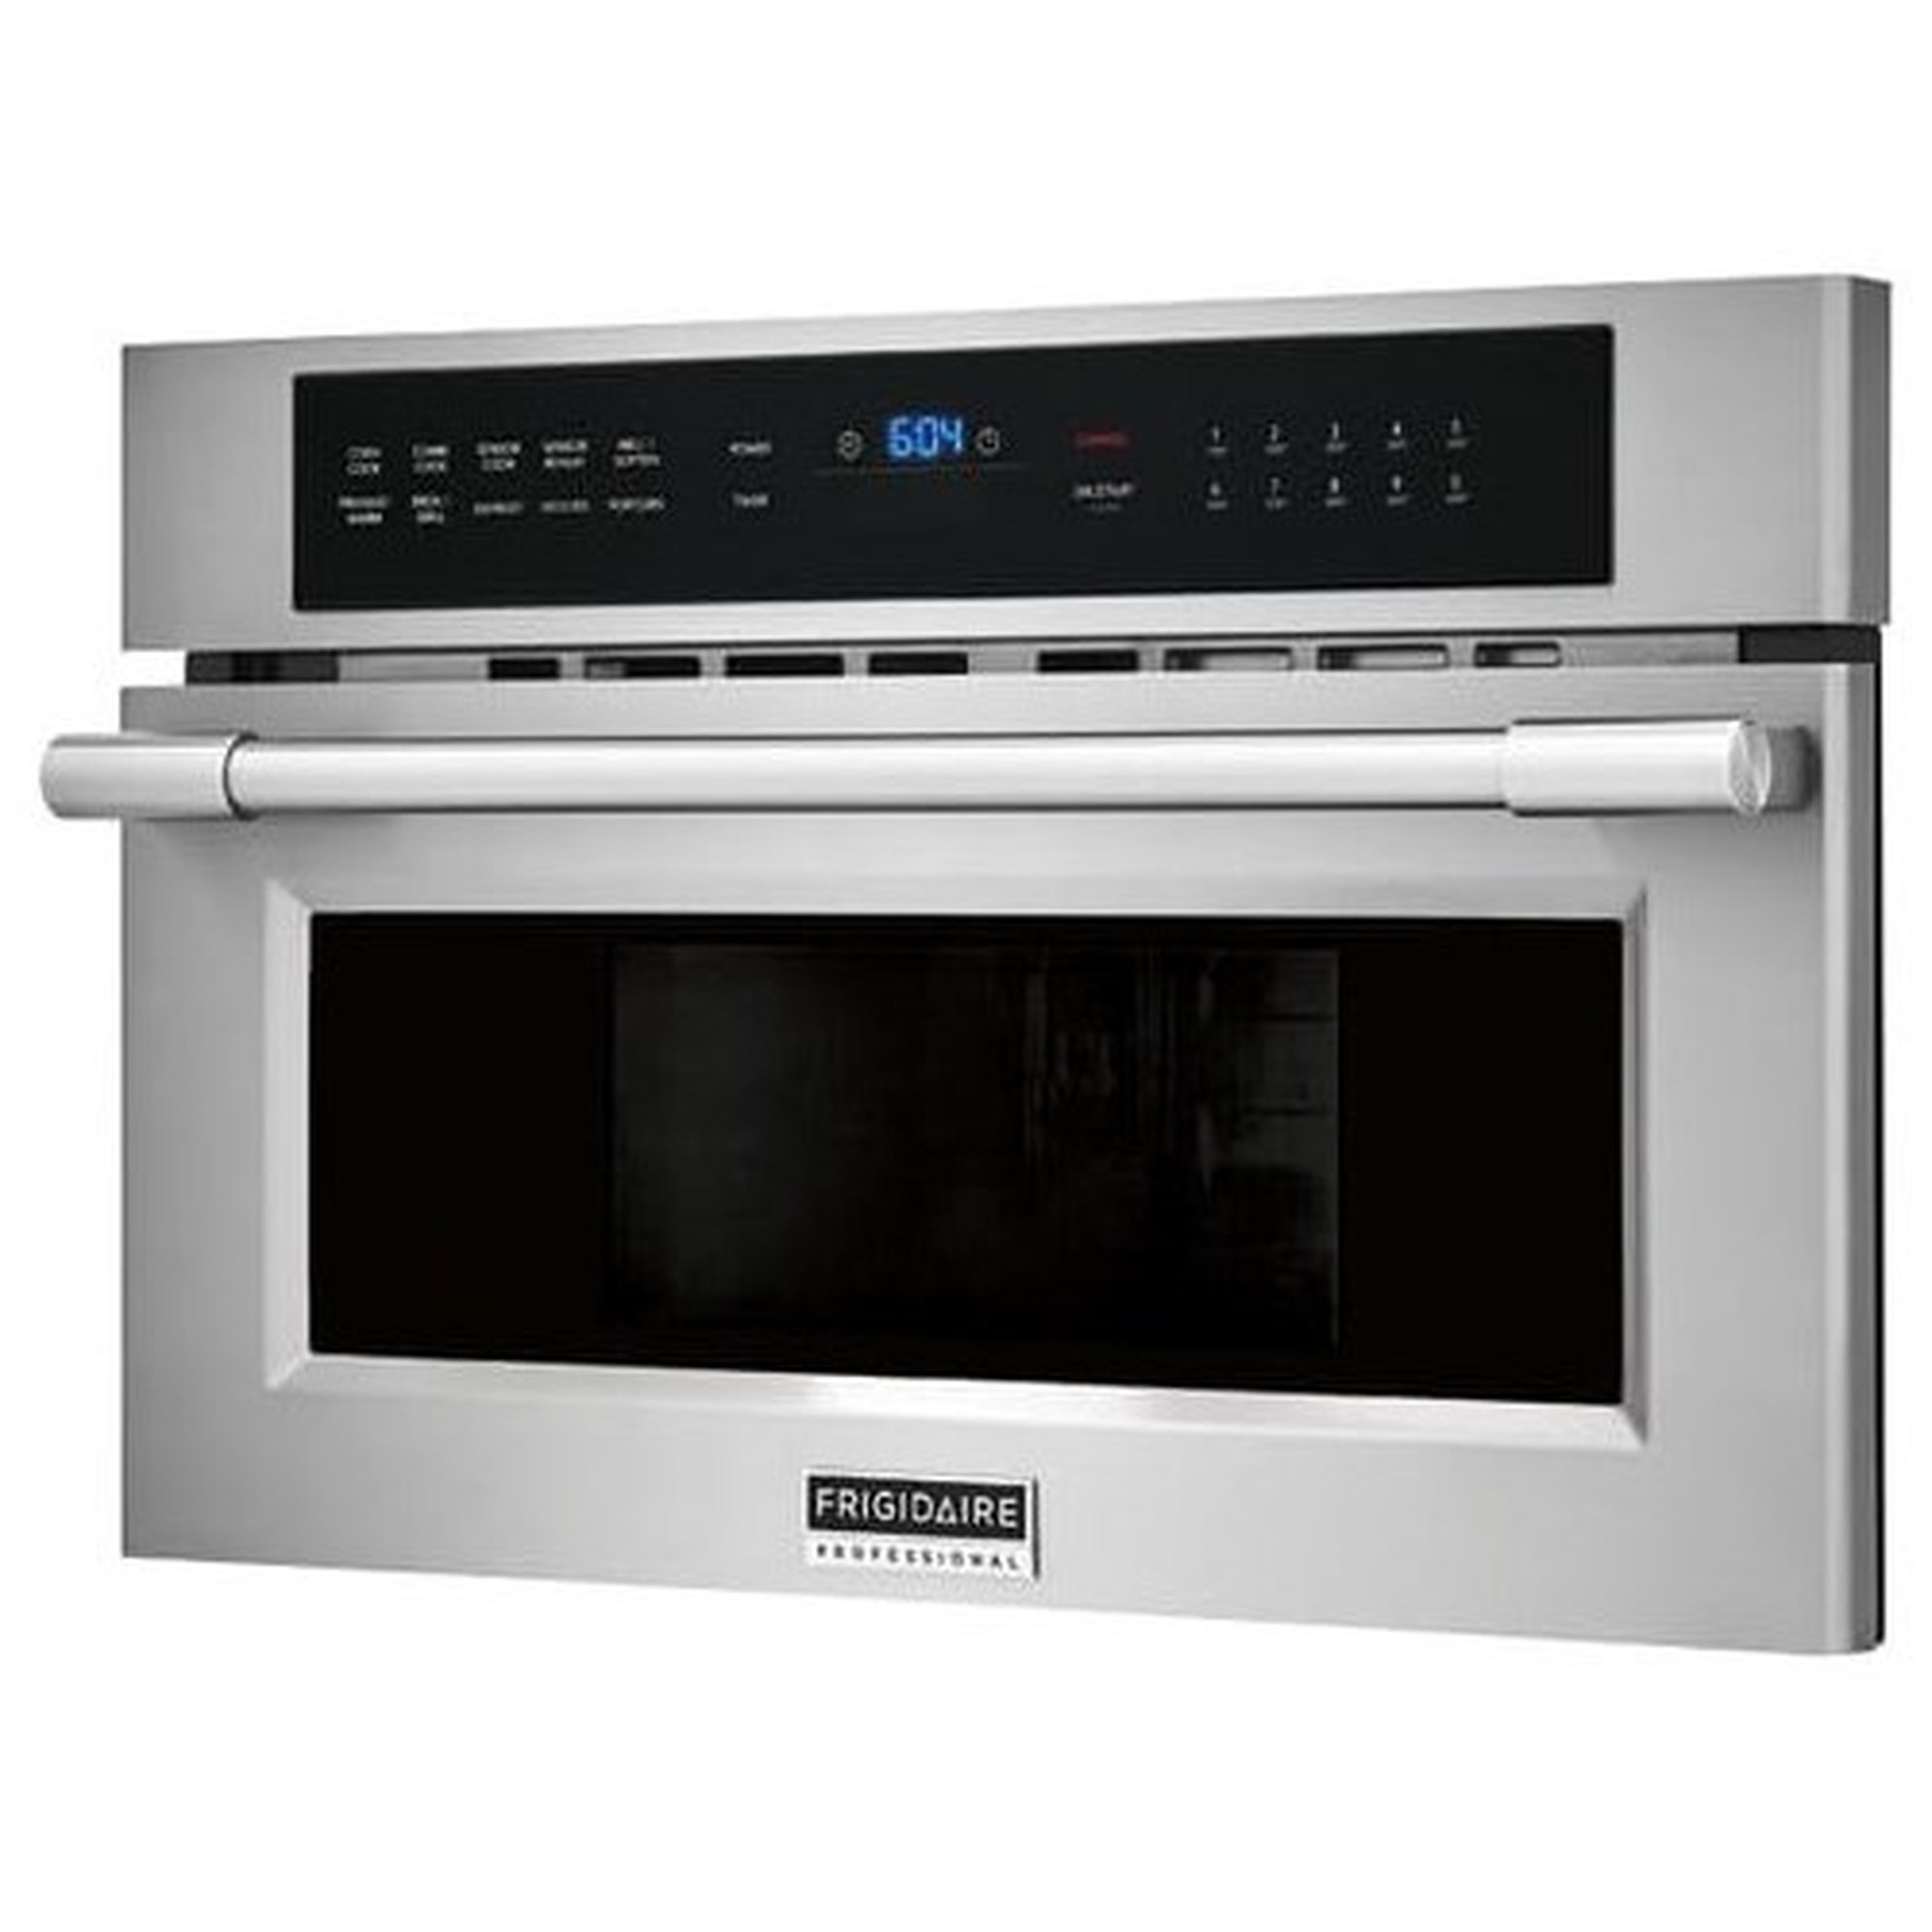 https://imageresizer4.furnituredealer.net/img/remote/images.furnituredealer.net/img/products%2Ffrigidaire%2Fcolor%2Fmicrowaves-%20frigidaire_fpmo3077tf-b2.jpg?width=2000&height=2000&scale=both